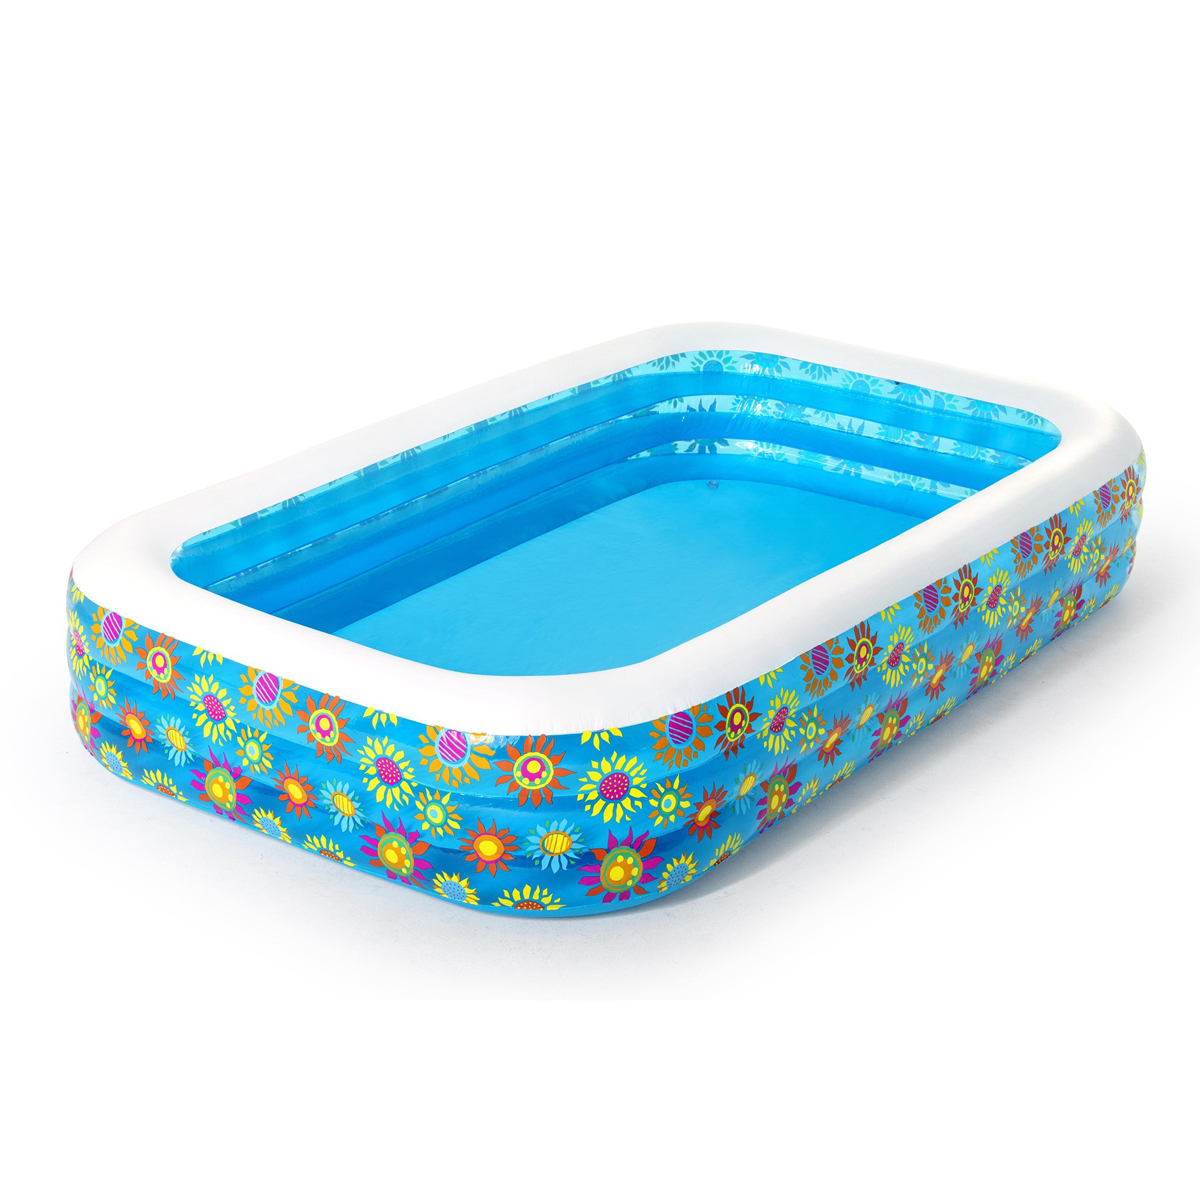 290-x-175CM-Inflatable-Swimming-Pool-Children-Adults--Summer-Bathing-Tub-Baby-Home-Use-Inflatable-Pa-1692678-9